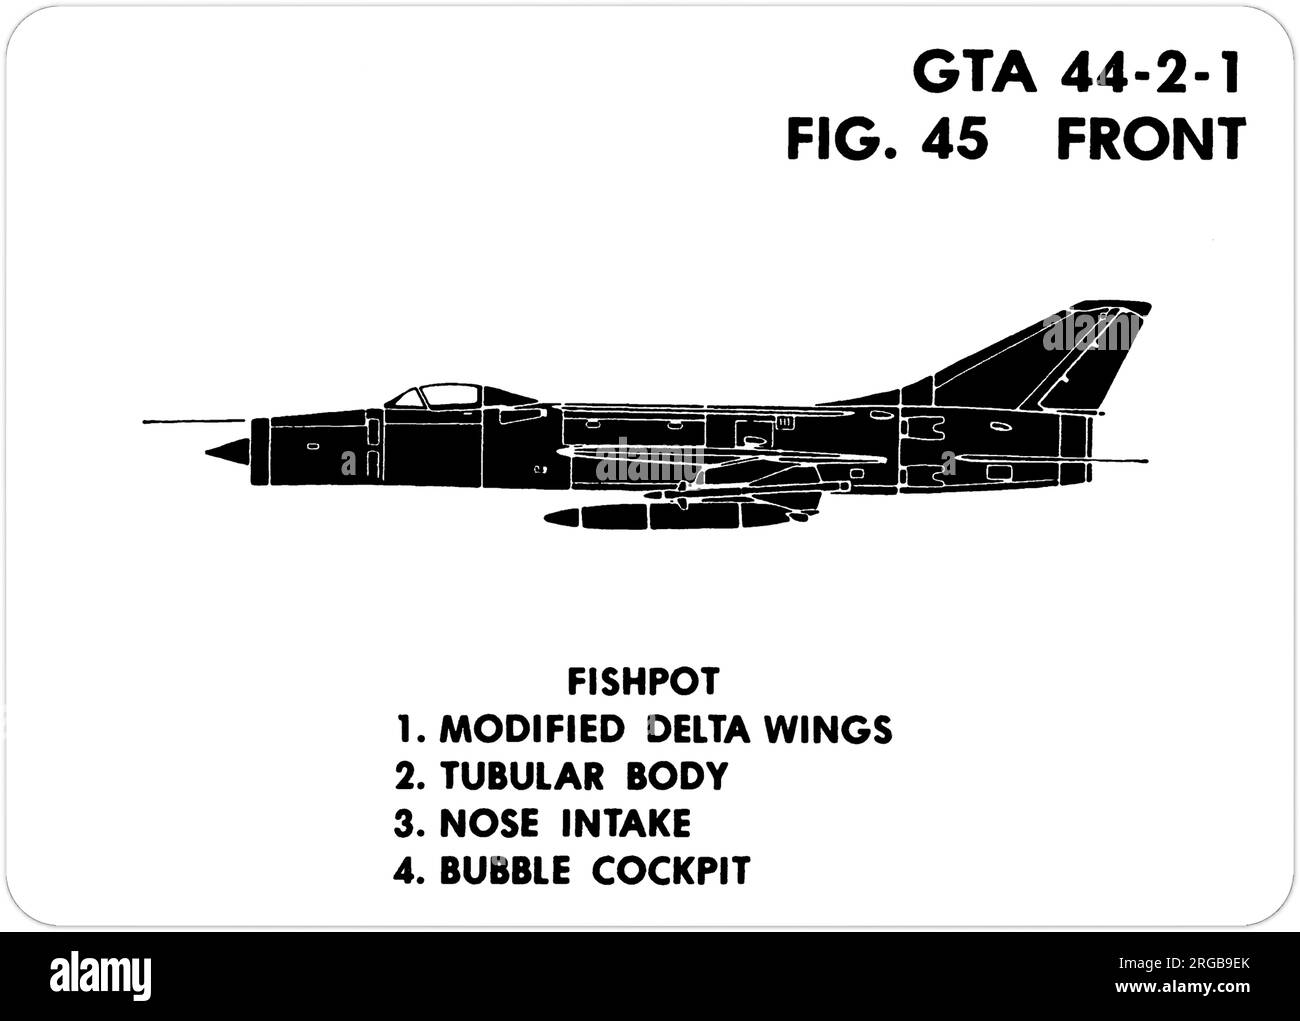 Sukhoi Su-9 - Su-11 (NATO codename: Fishpot). This is one of the series of Graphics Training Aids (GTA) used by the United States Army to train their personnel to recognize friendly and hostile aircraft. This particular set, GTA 44-2-1, was issued in July1977. The set features aircraft from: Canada, Italy, United Kingdom, United States, and the USSR. Stock Photo